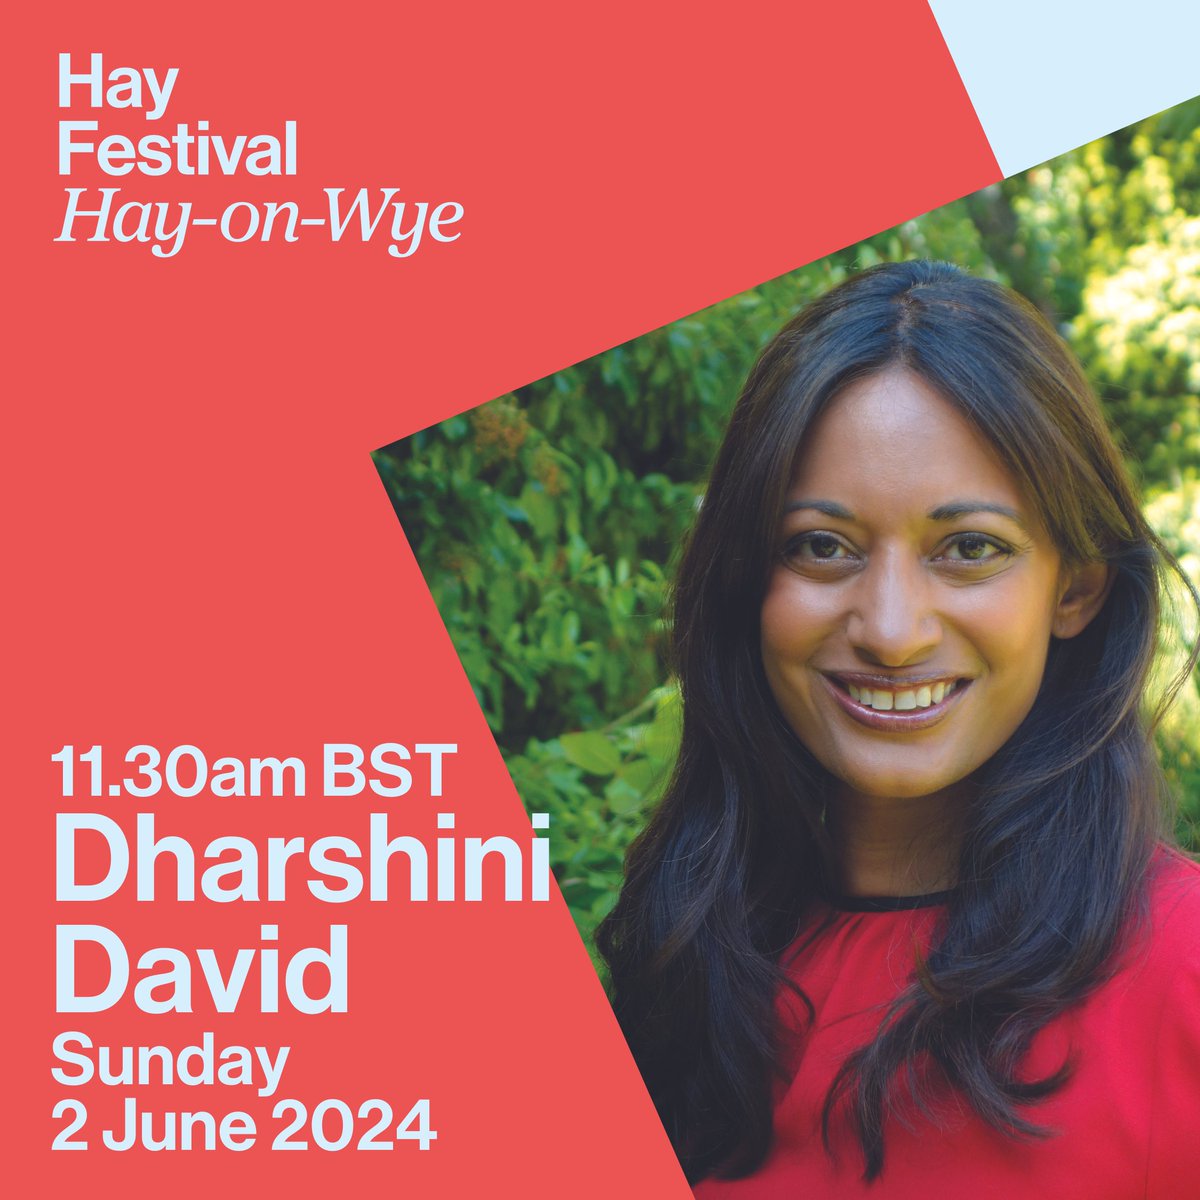 Don't miss this #Environomics event about the future of our green economy, and what it means for us (and our wallets) at this @hayfestival event with BBC Chief Economics Correspondent @DharshiniDavid! 2nd June at 11:30am: hayfestival.com/p-21309-dharsh… #HayFestival2024 #NonFiction